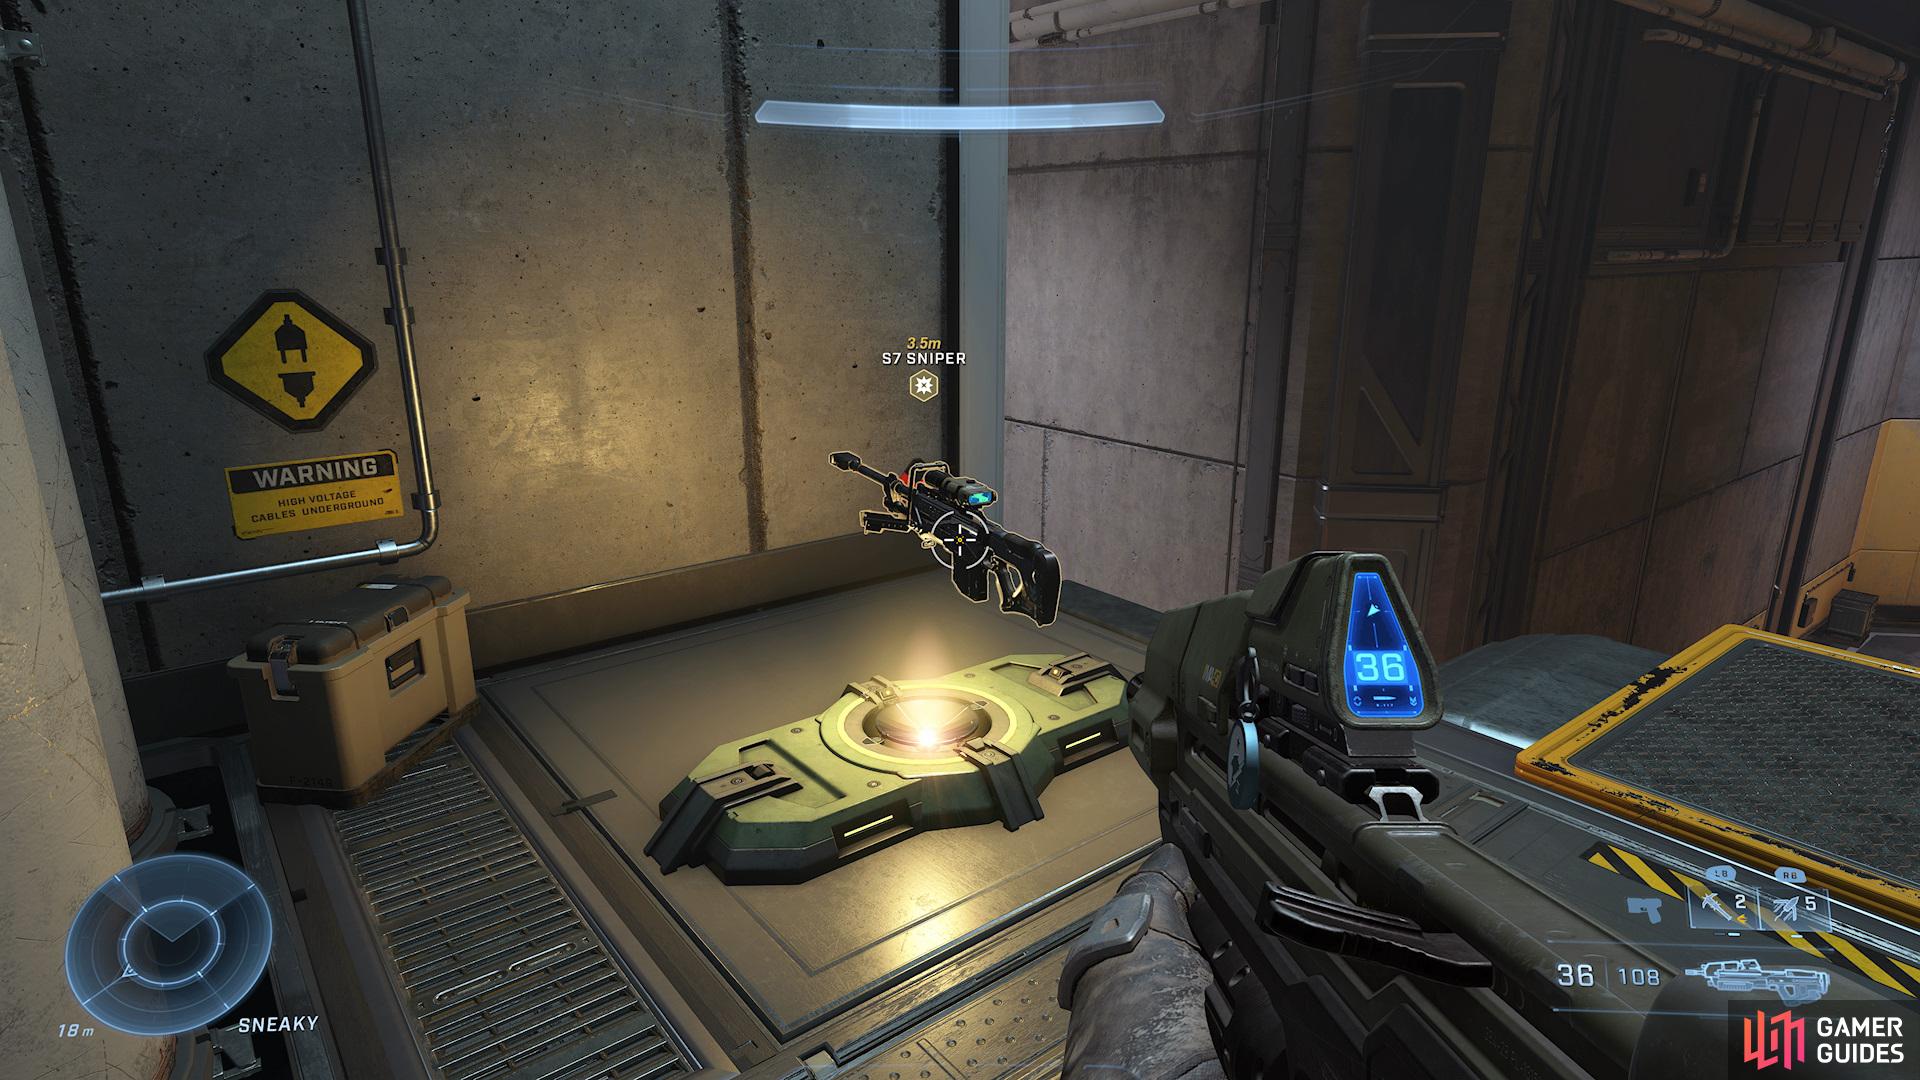 The First Power Weapon can be found in the Sneaky Area of the Launch Tower.